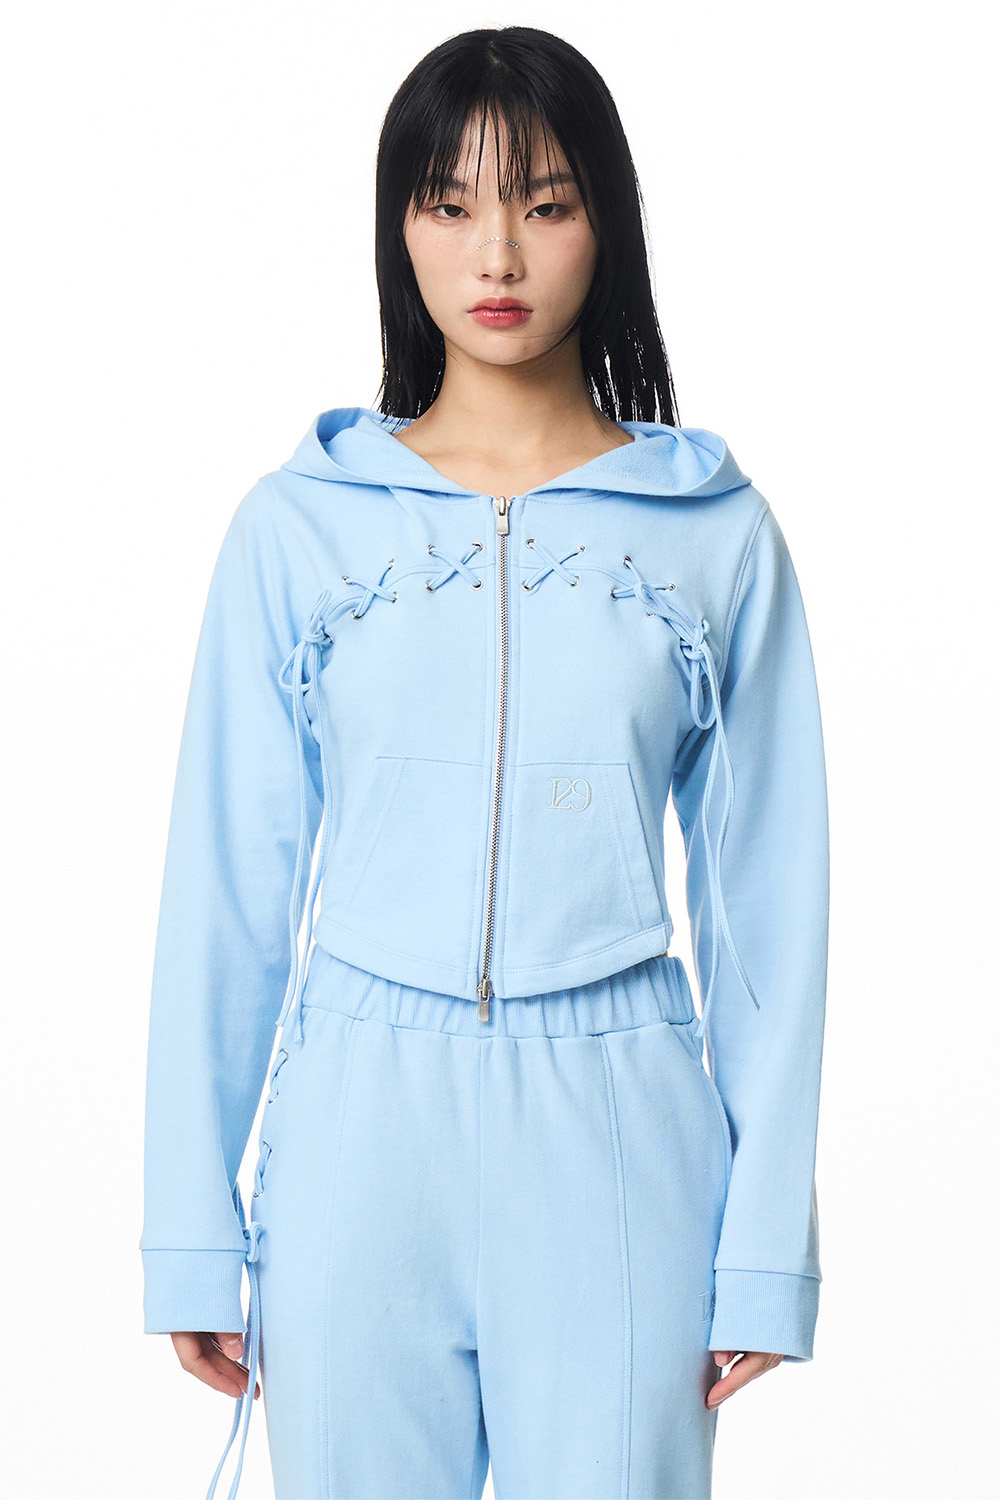 Eyelet Lace Up Hooded Zip-Up Light Blue